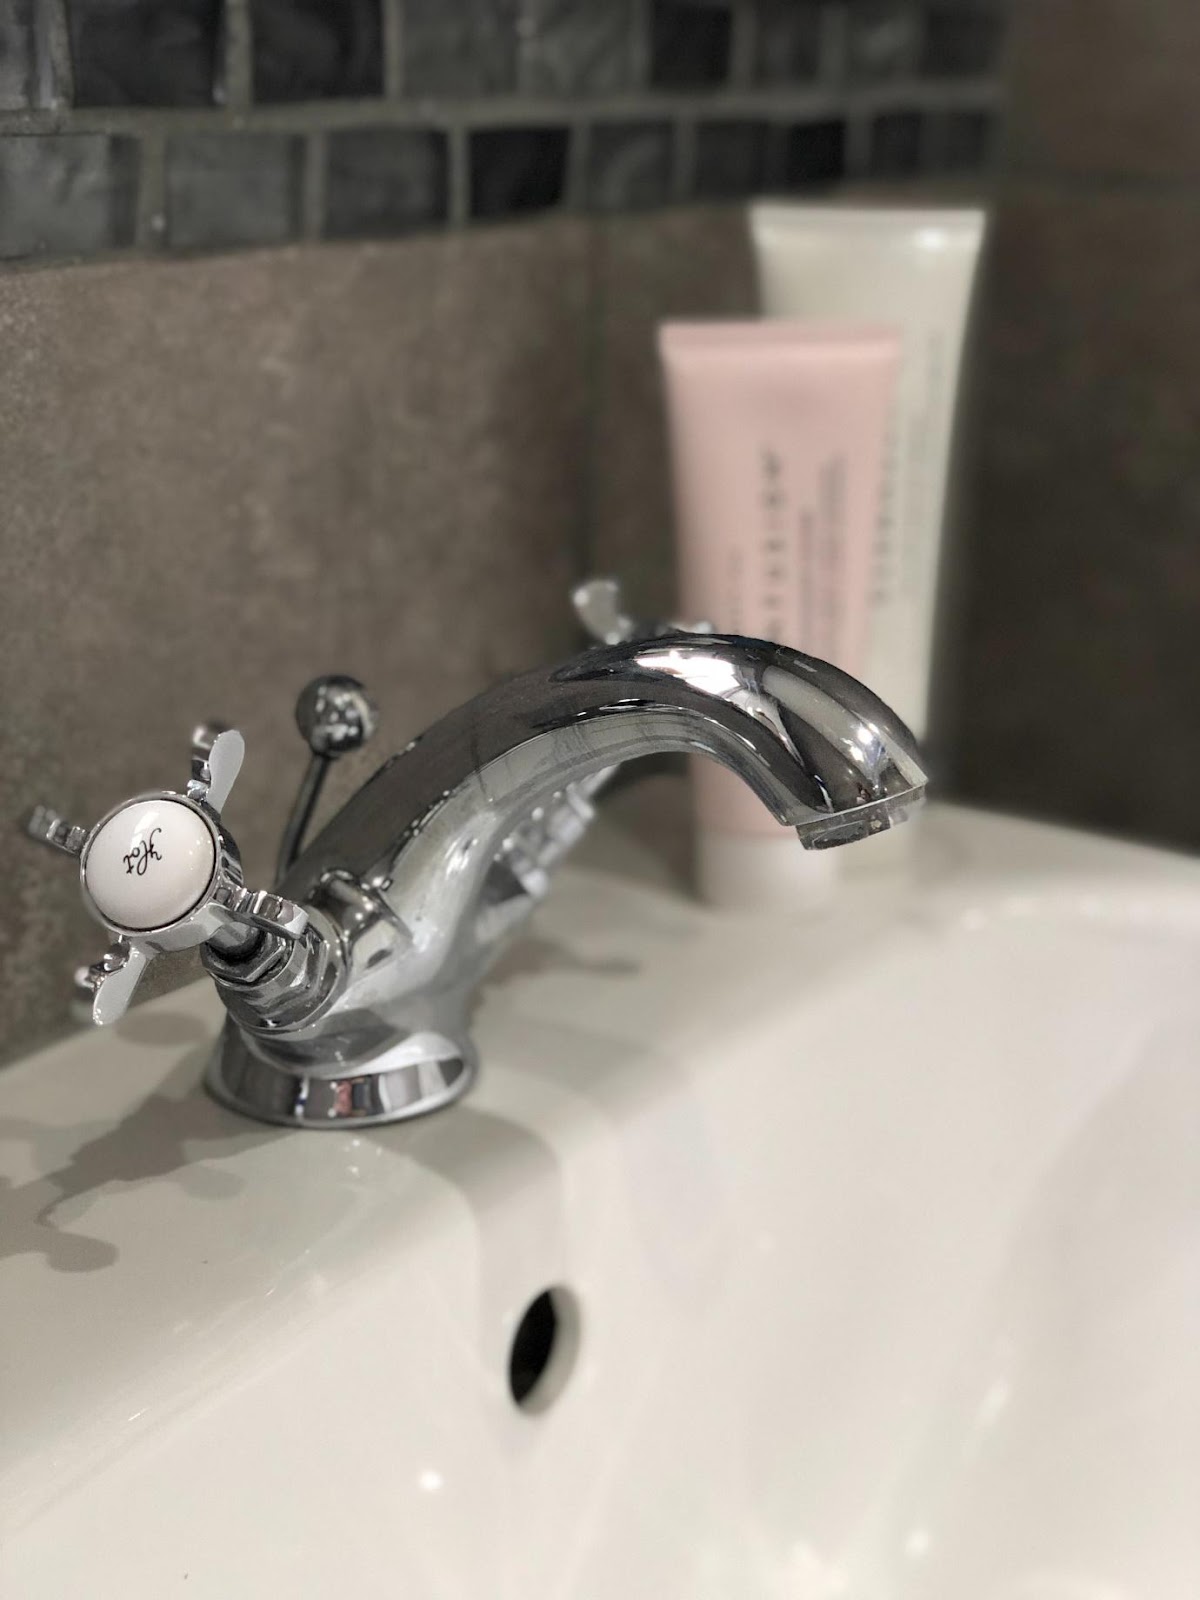 A close up of a sink

Description automatically generated